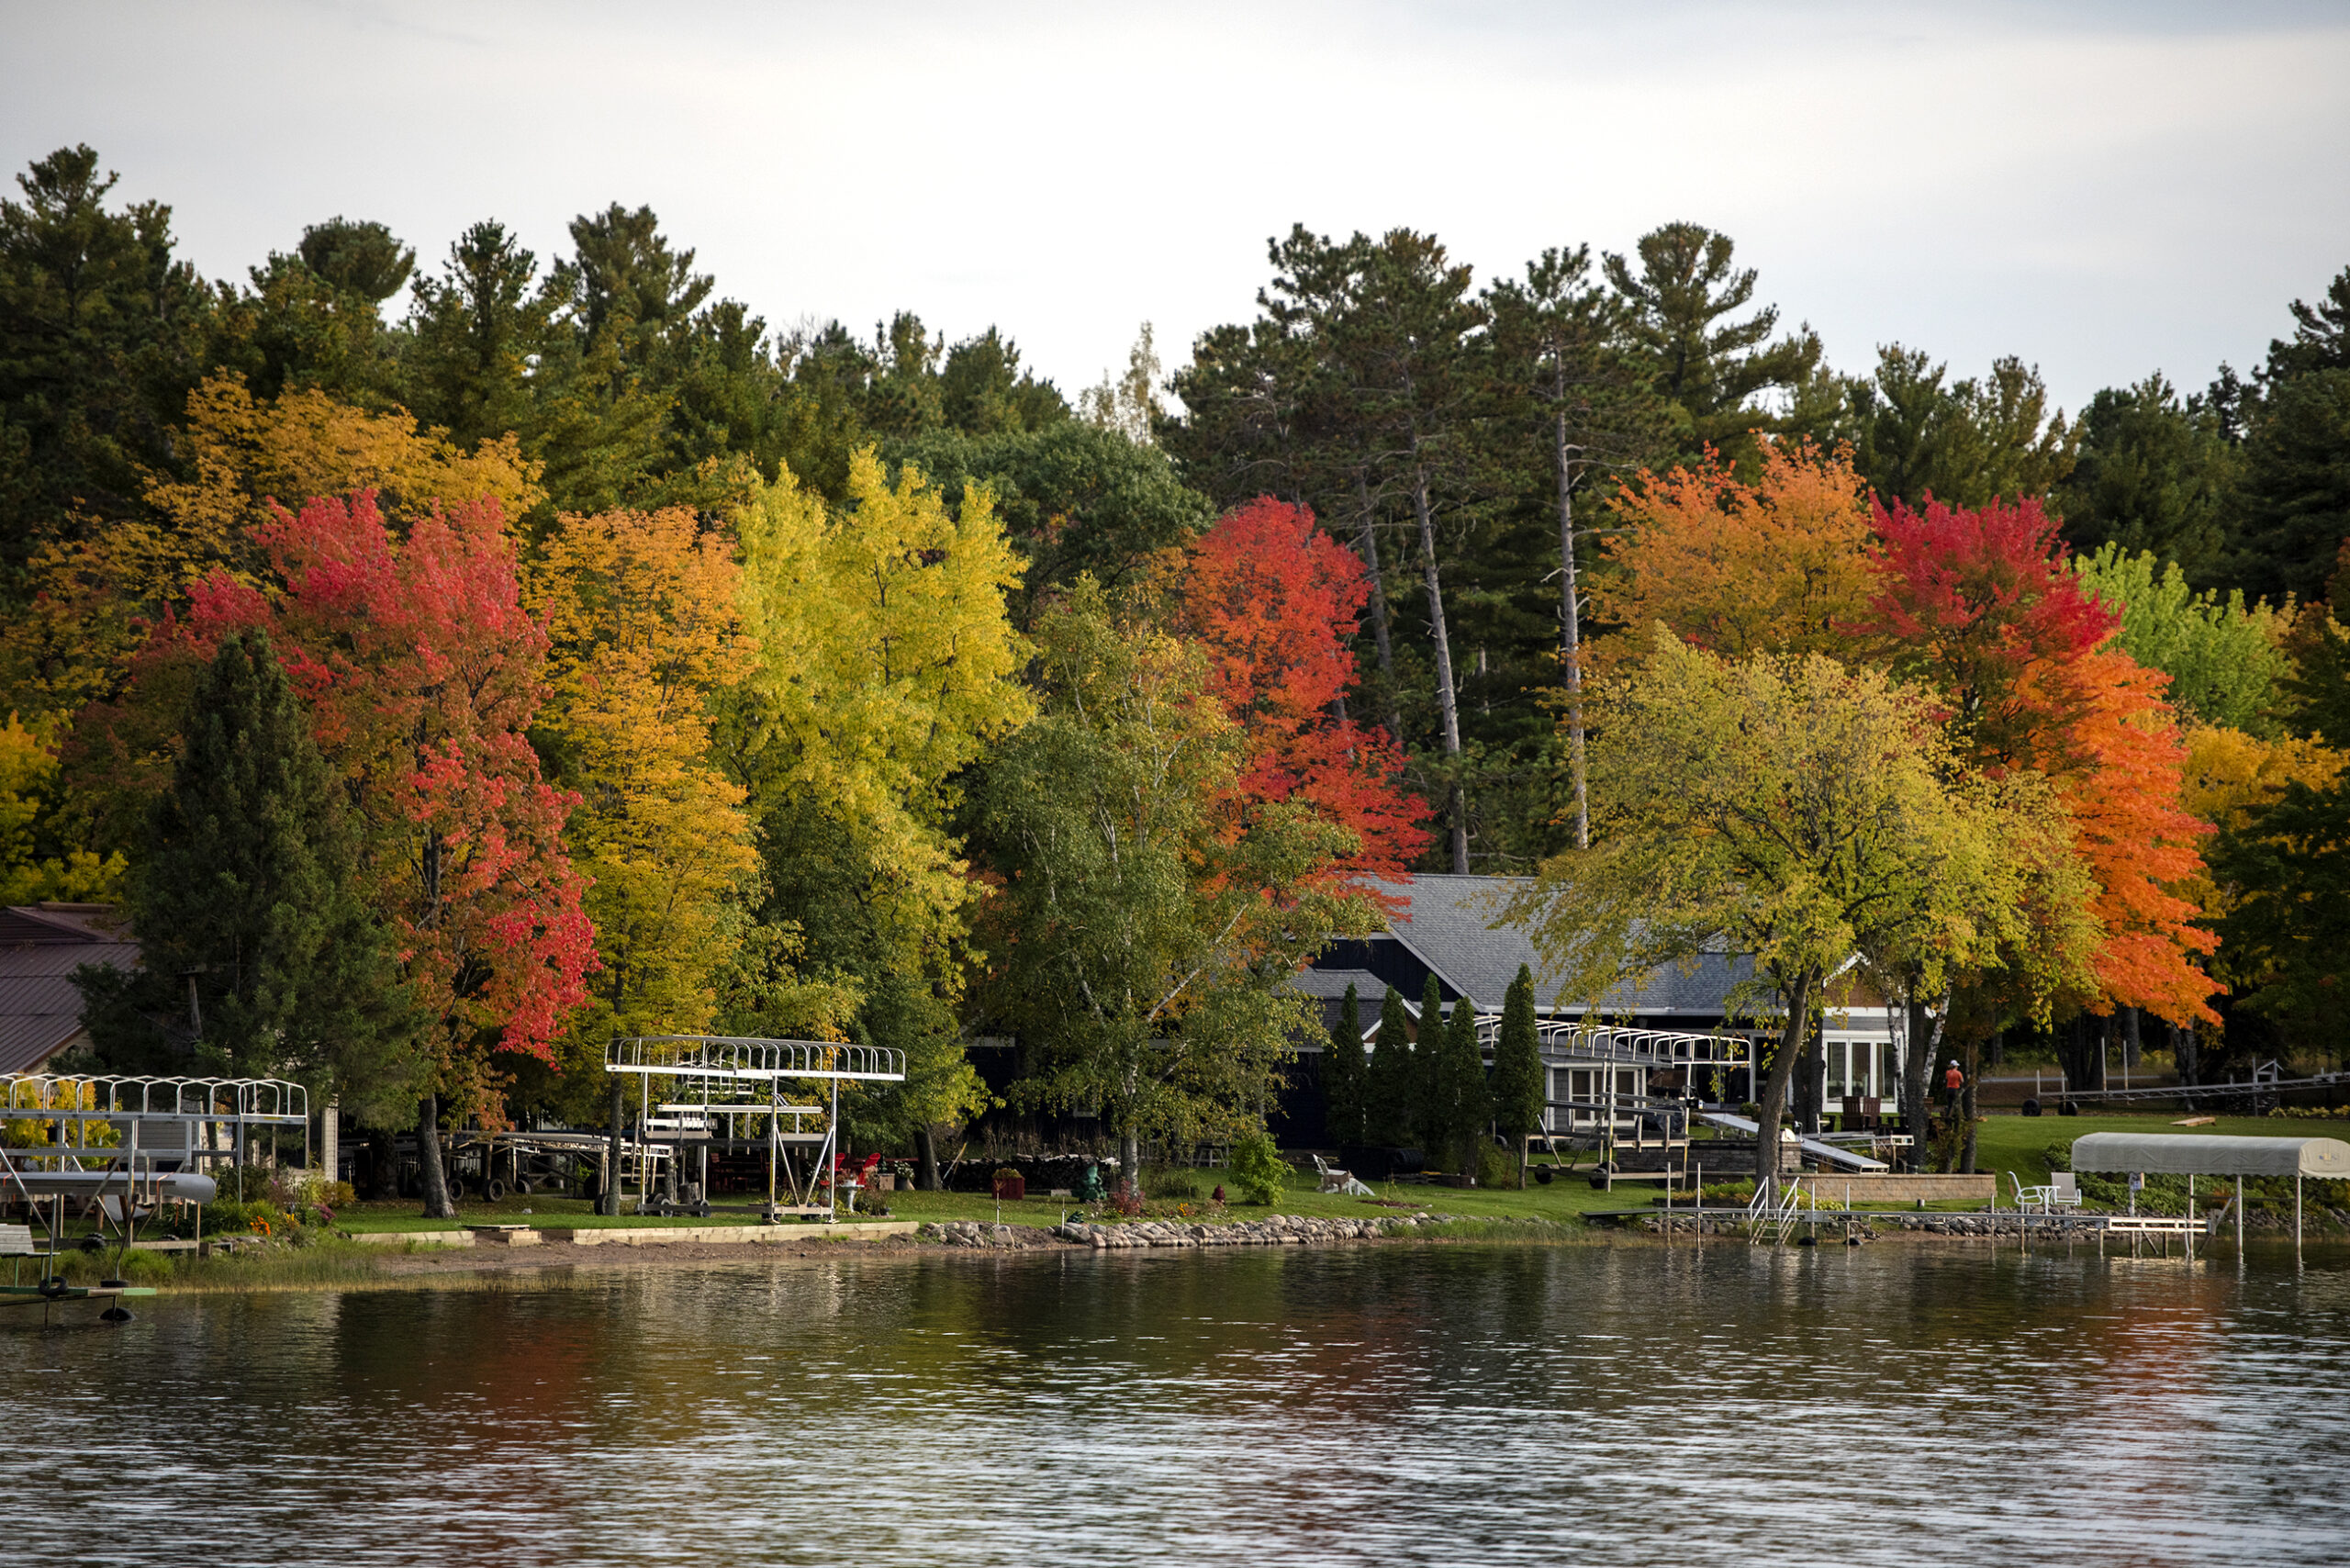 Bright red, orange, and yellow leaves surround homes on a lake.